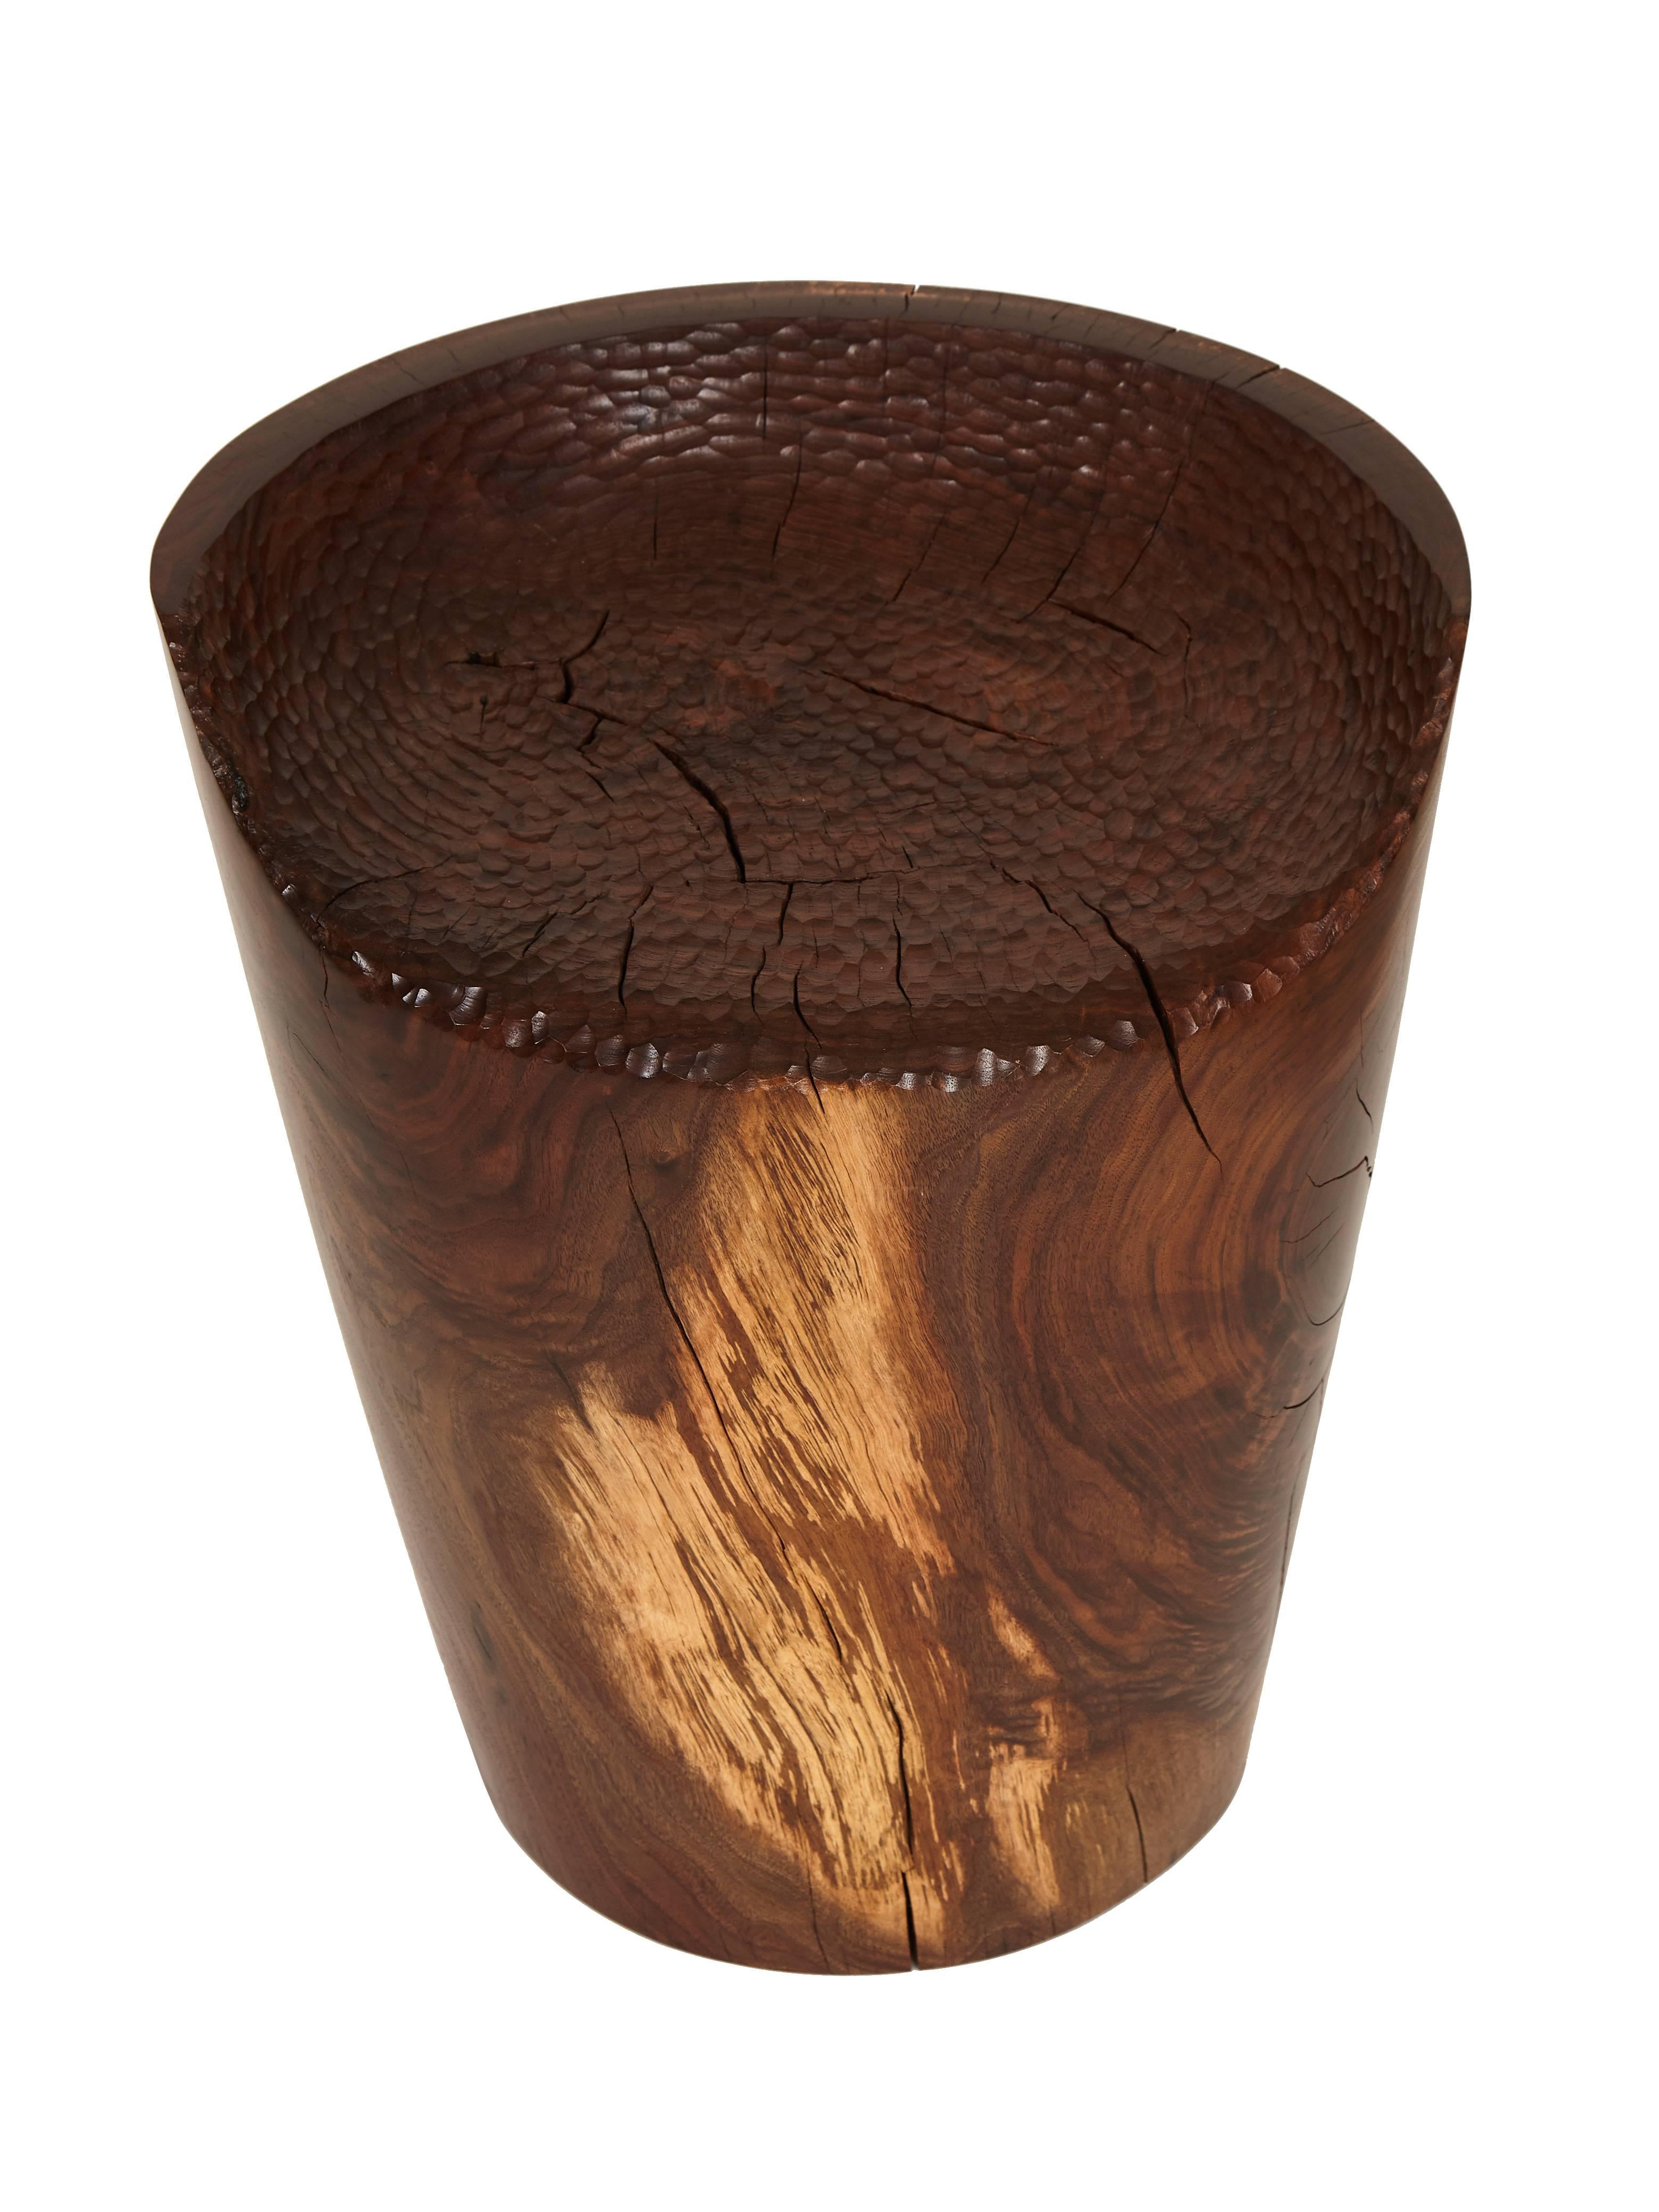 Carved walnut stool by Caleb Woodard from solid walnut, circa 2017. Hand-carved highly sculpted organic form kiln dried to control splitting over time finished with a white oil hand rubbed finish. Caleb Woodard is a designer and second-generation